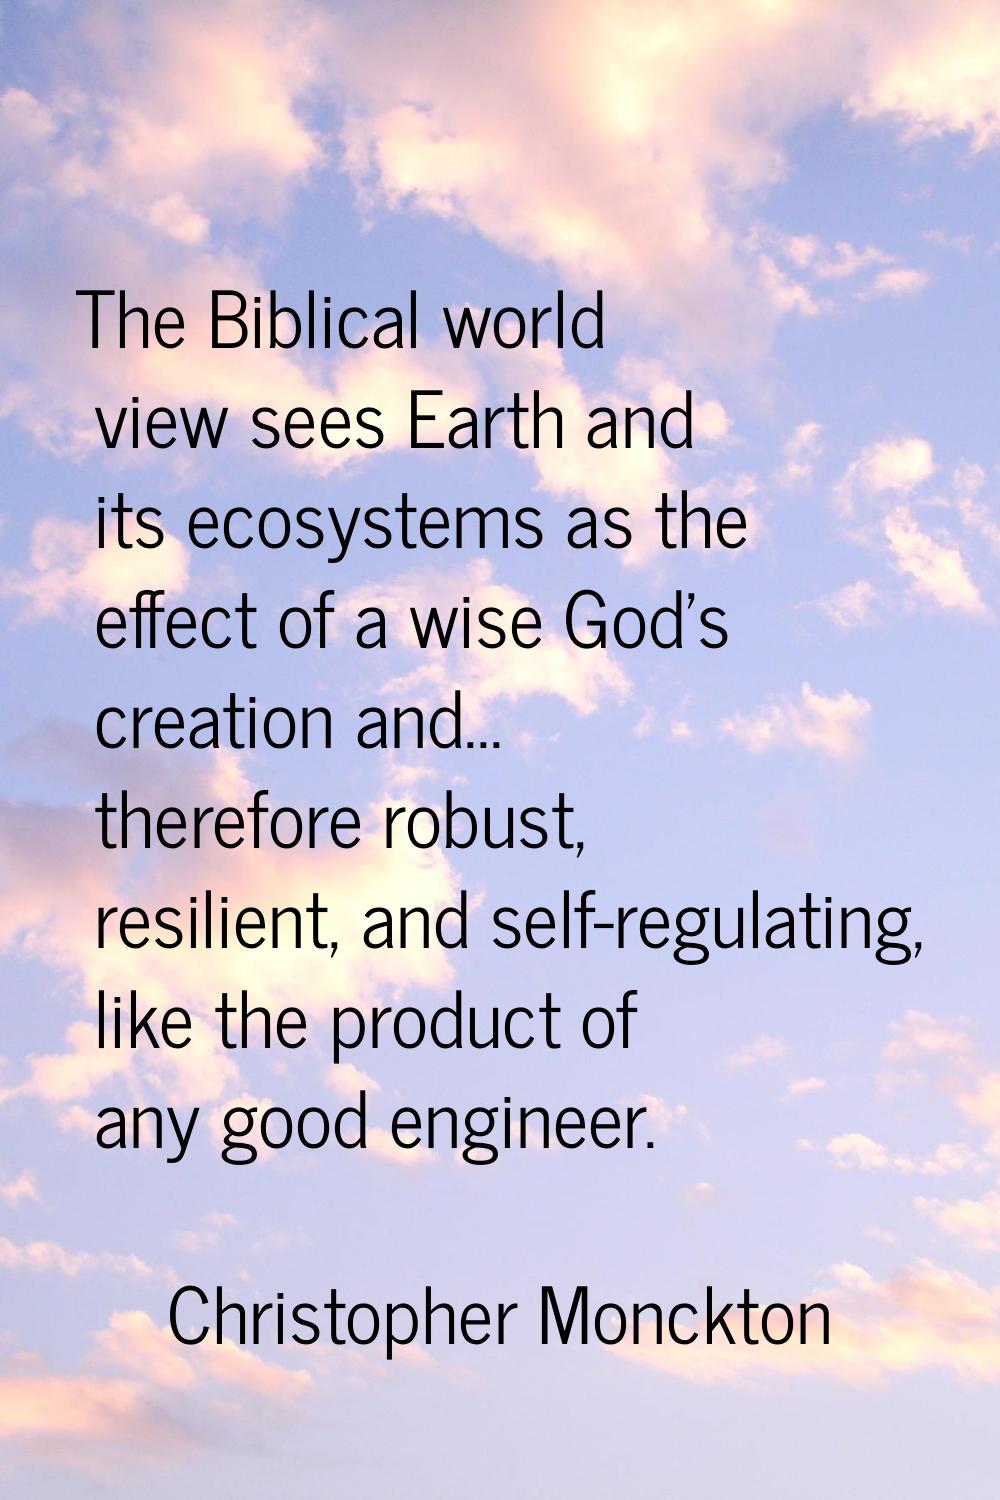 The Biblical world view sees Earth and its ecosystems as the effect of a wise God's creation and...